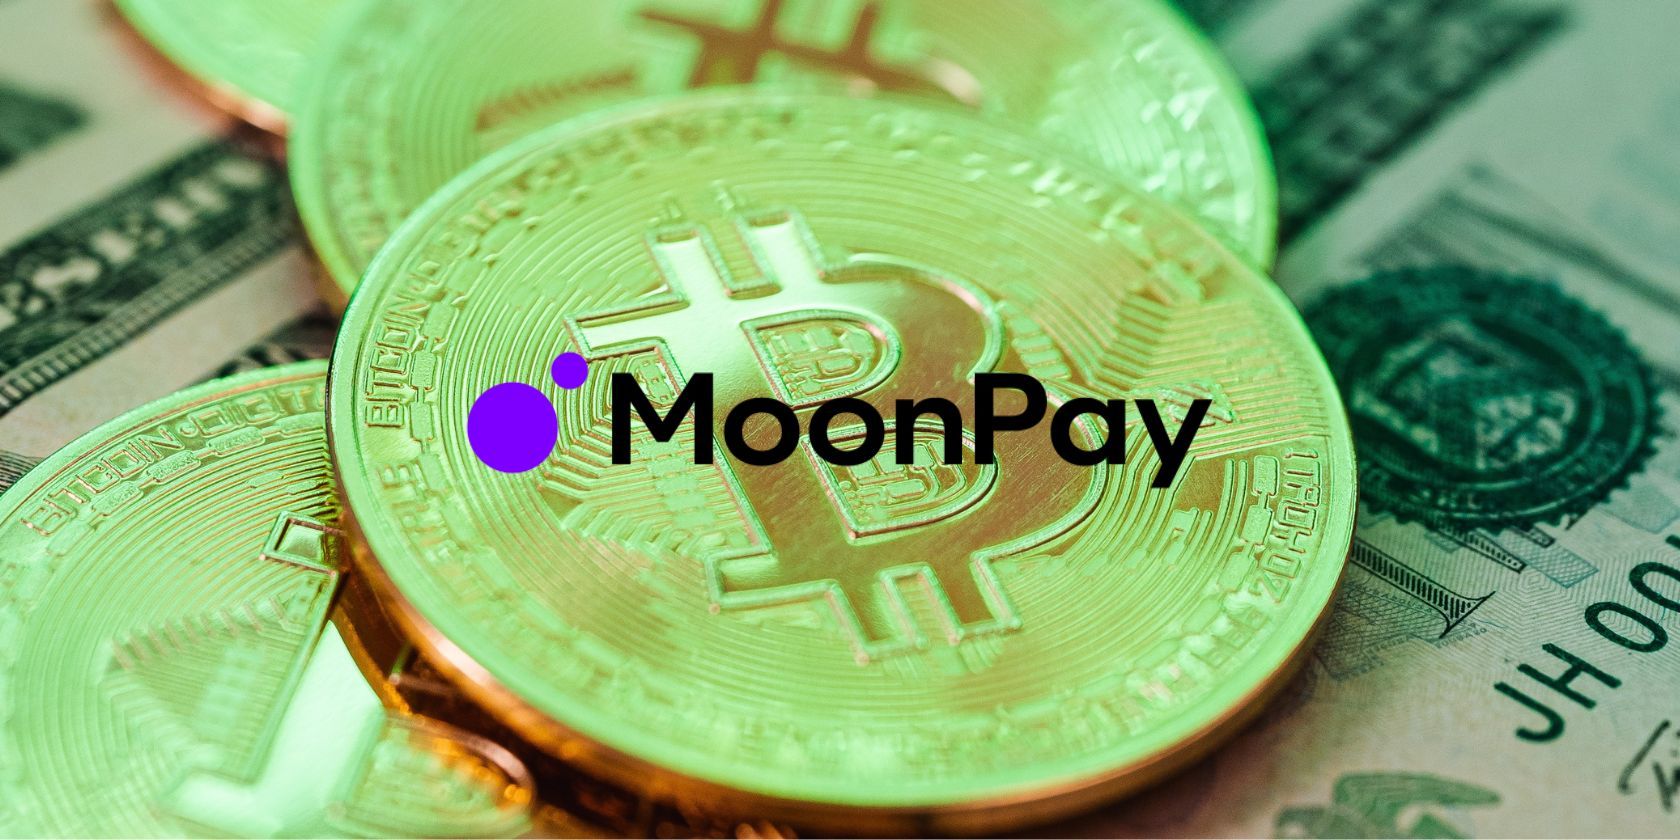 moon pay logo in front of bitcoins and dollar bills